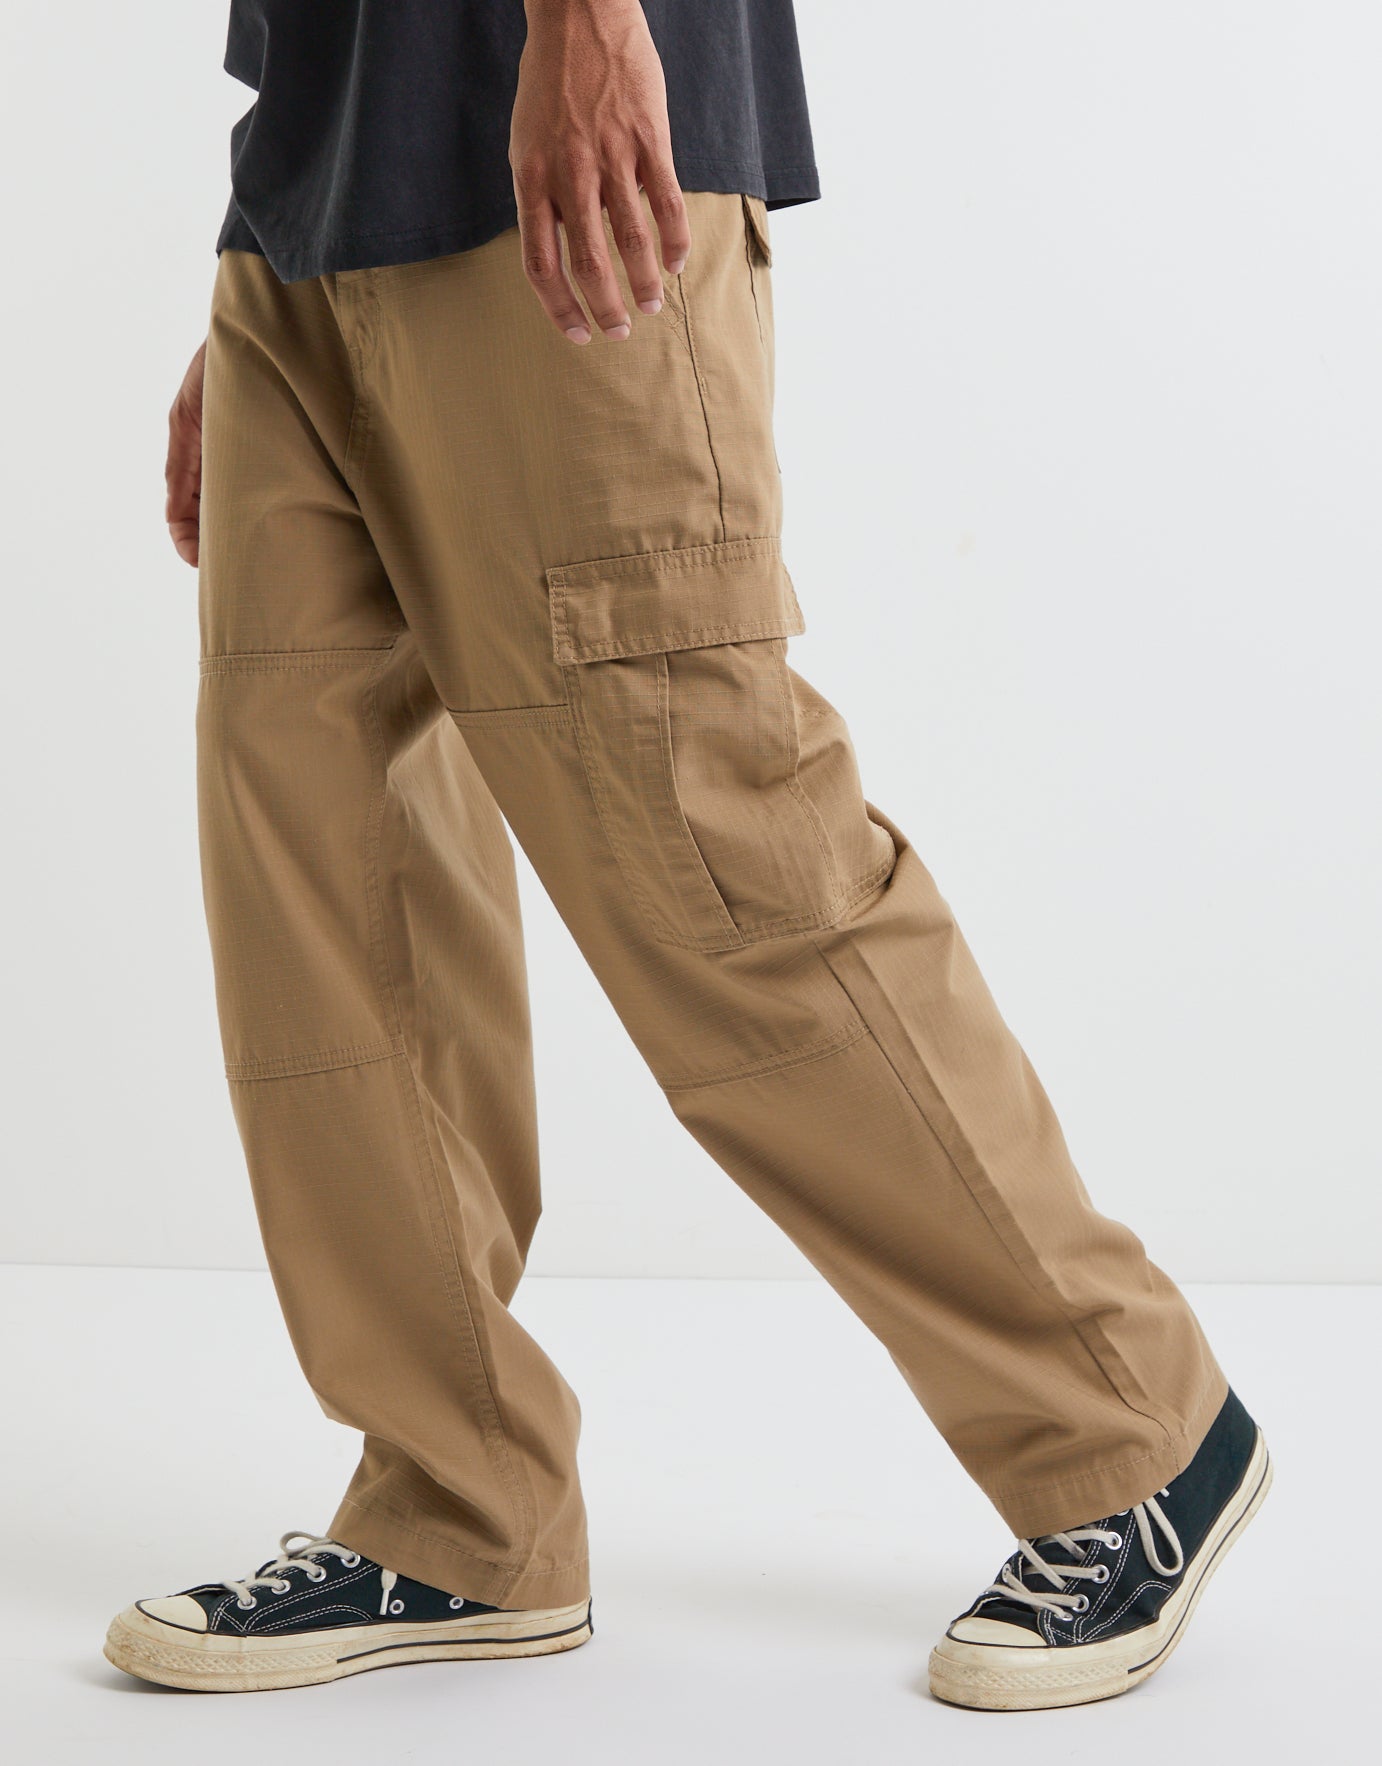 Cargo Pants Photos, Download The BEST Free Cargo Pants Stock Photos & HD  Images